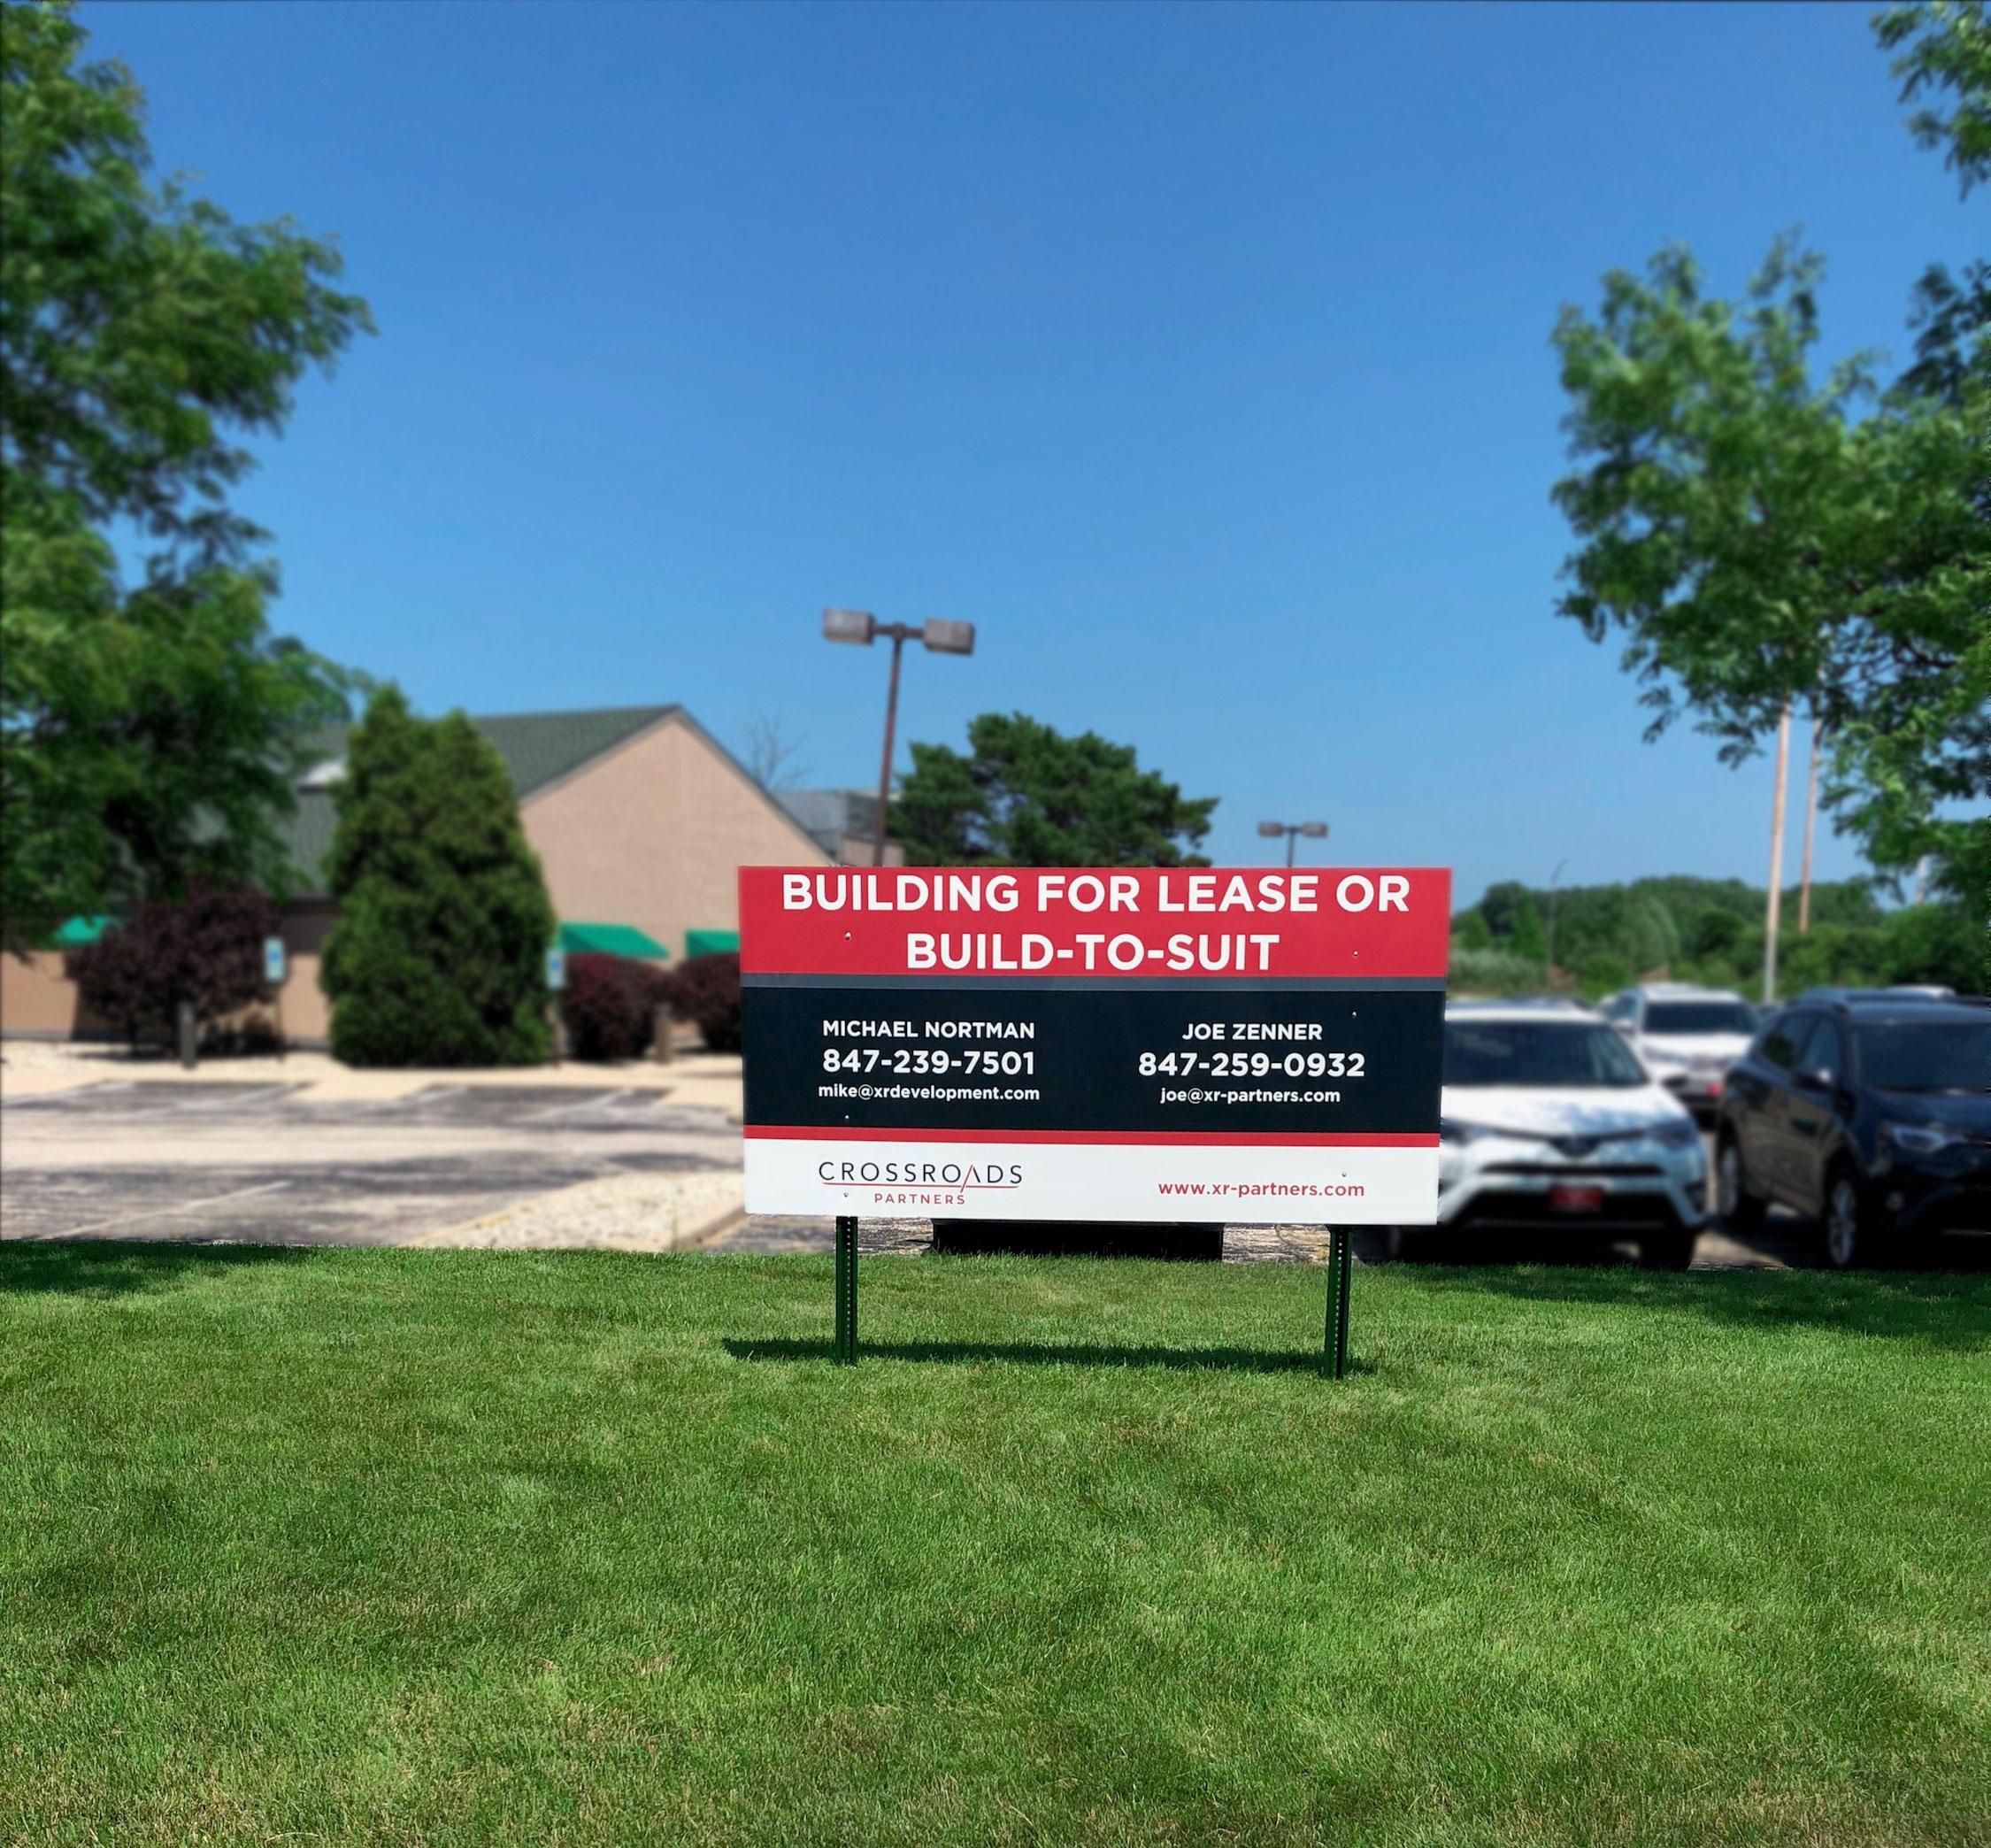 Building for Lease Outdoor Sign